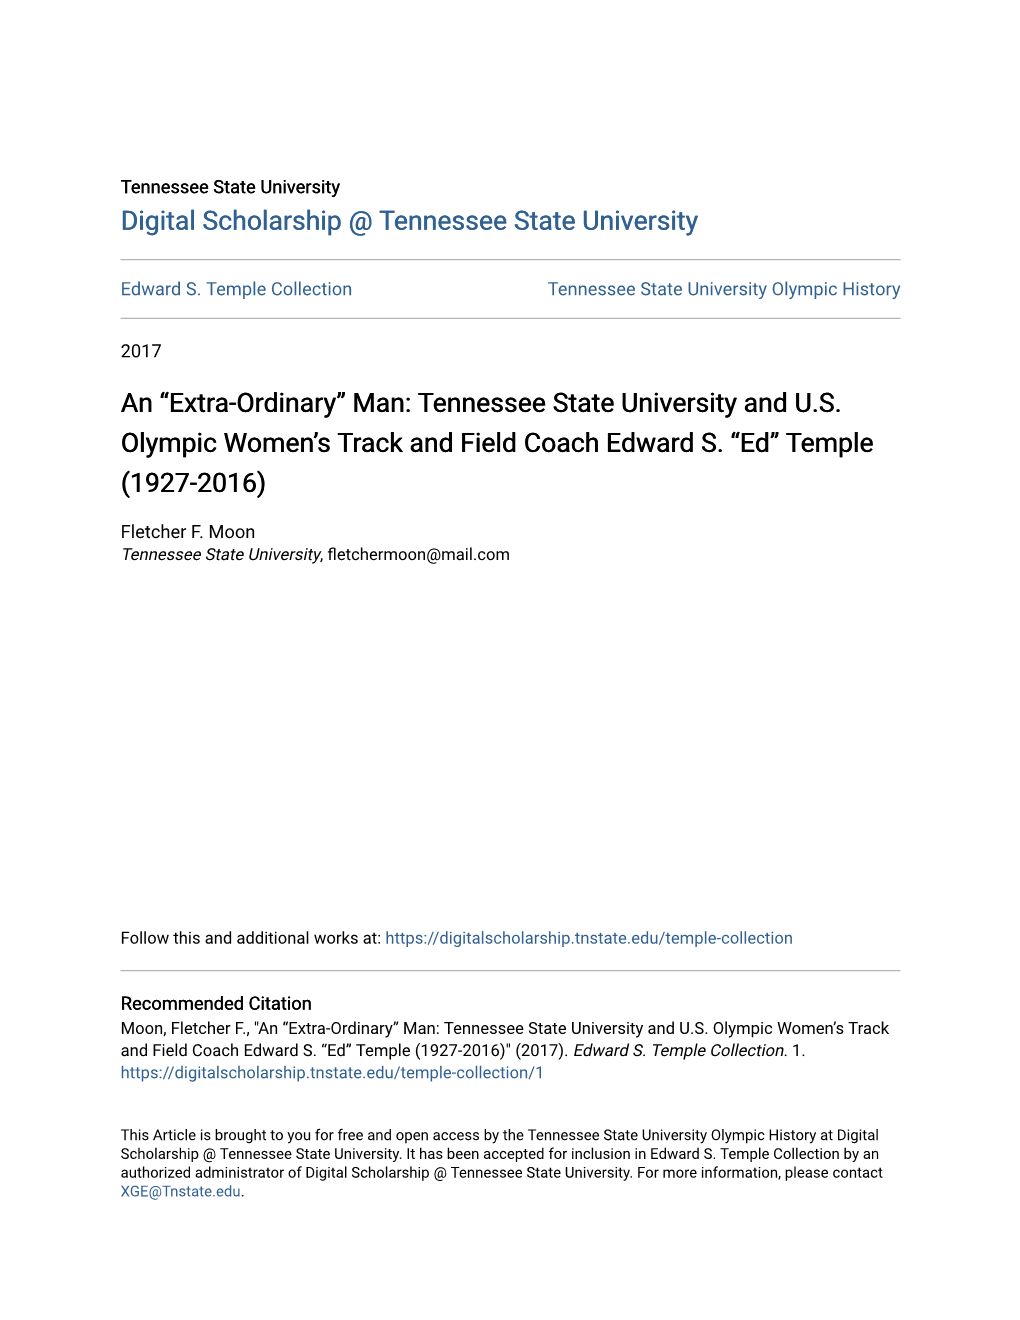 Tennessee State University and US Olympic Women's Track and Field